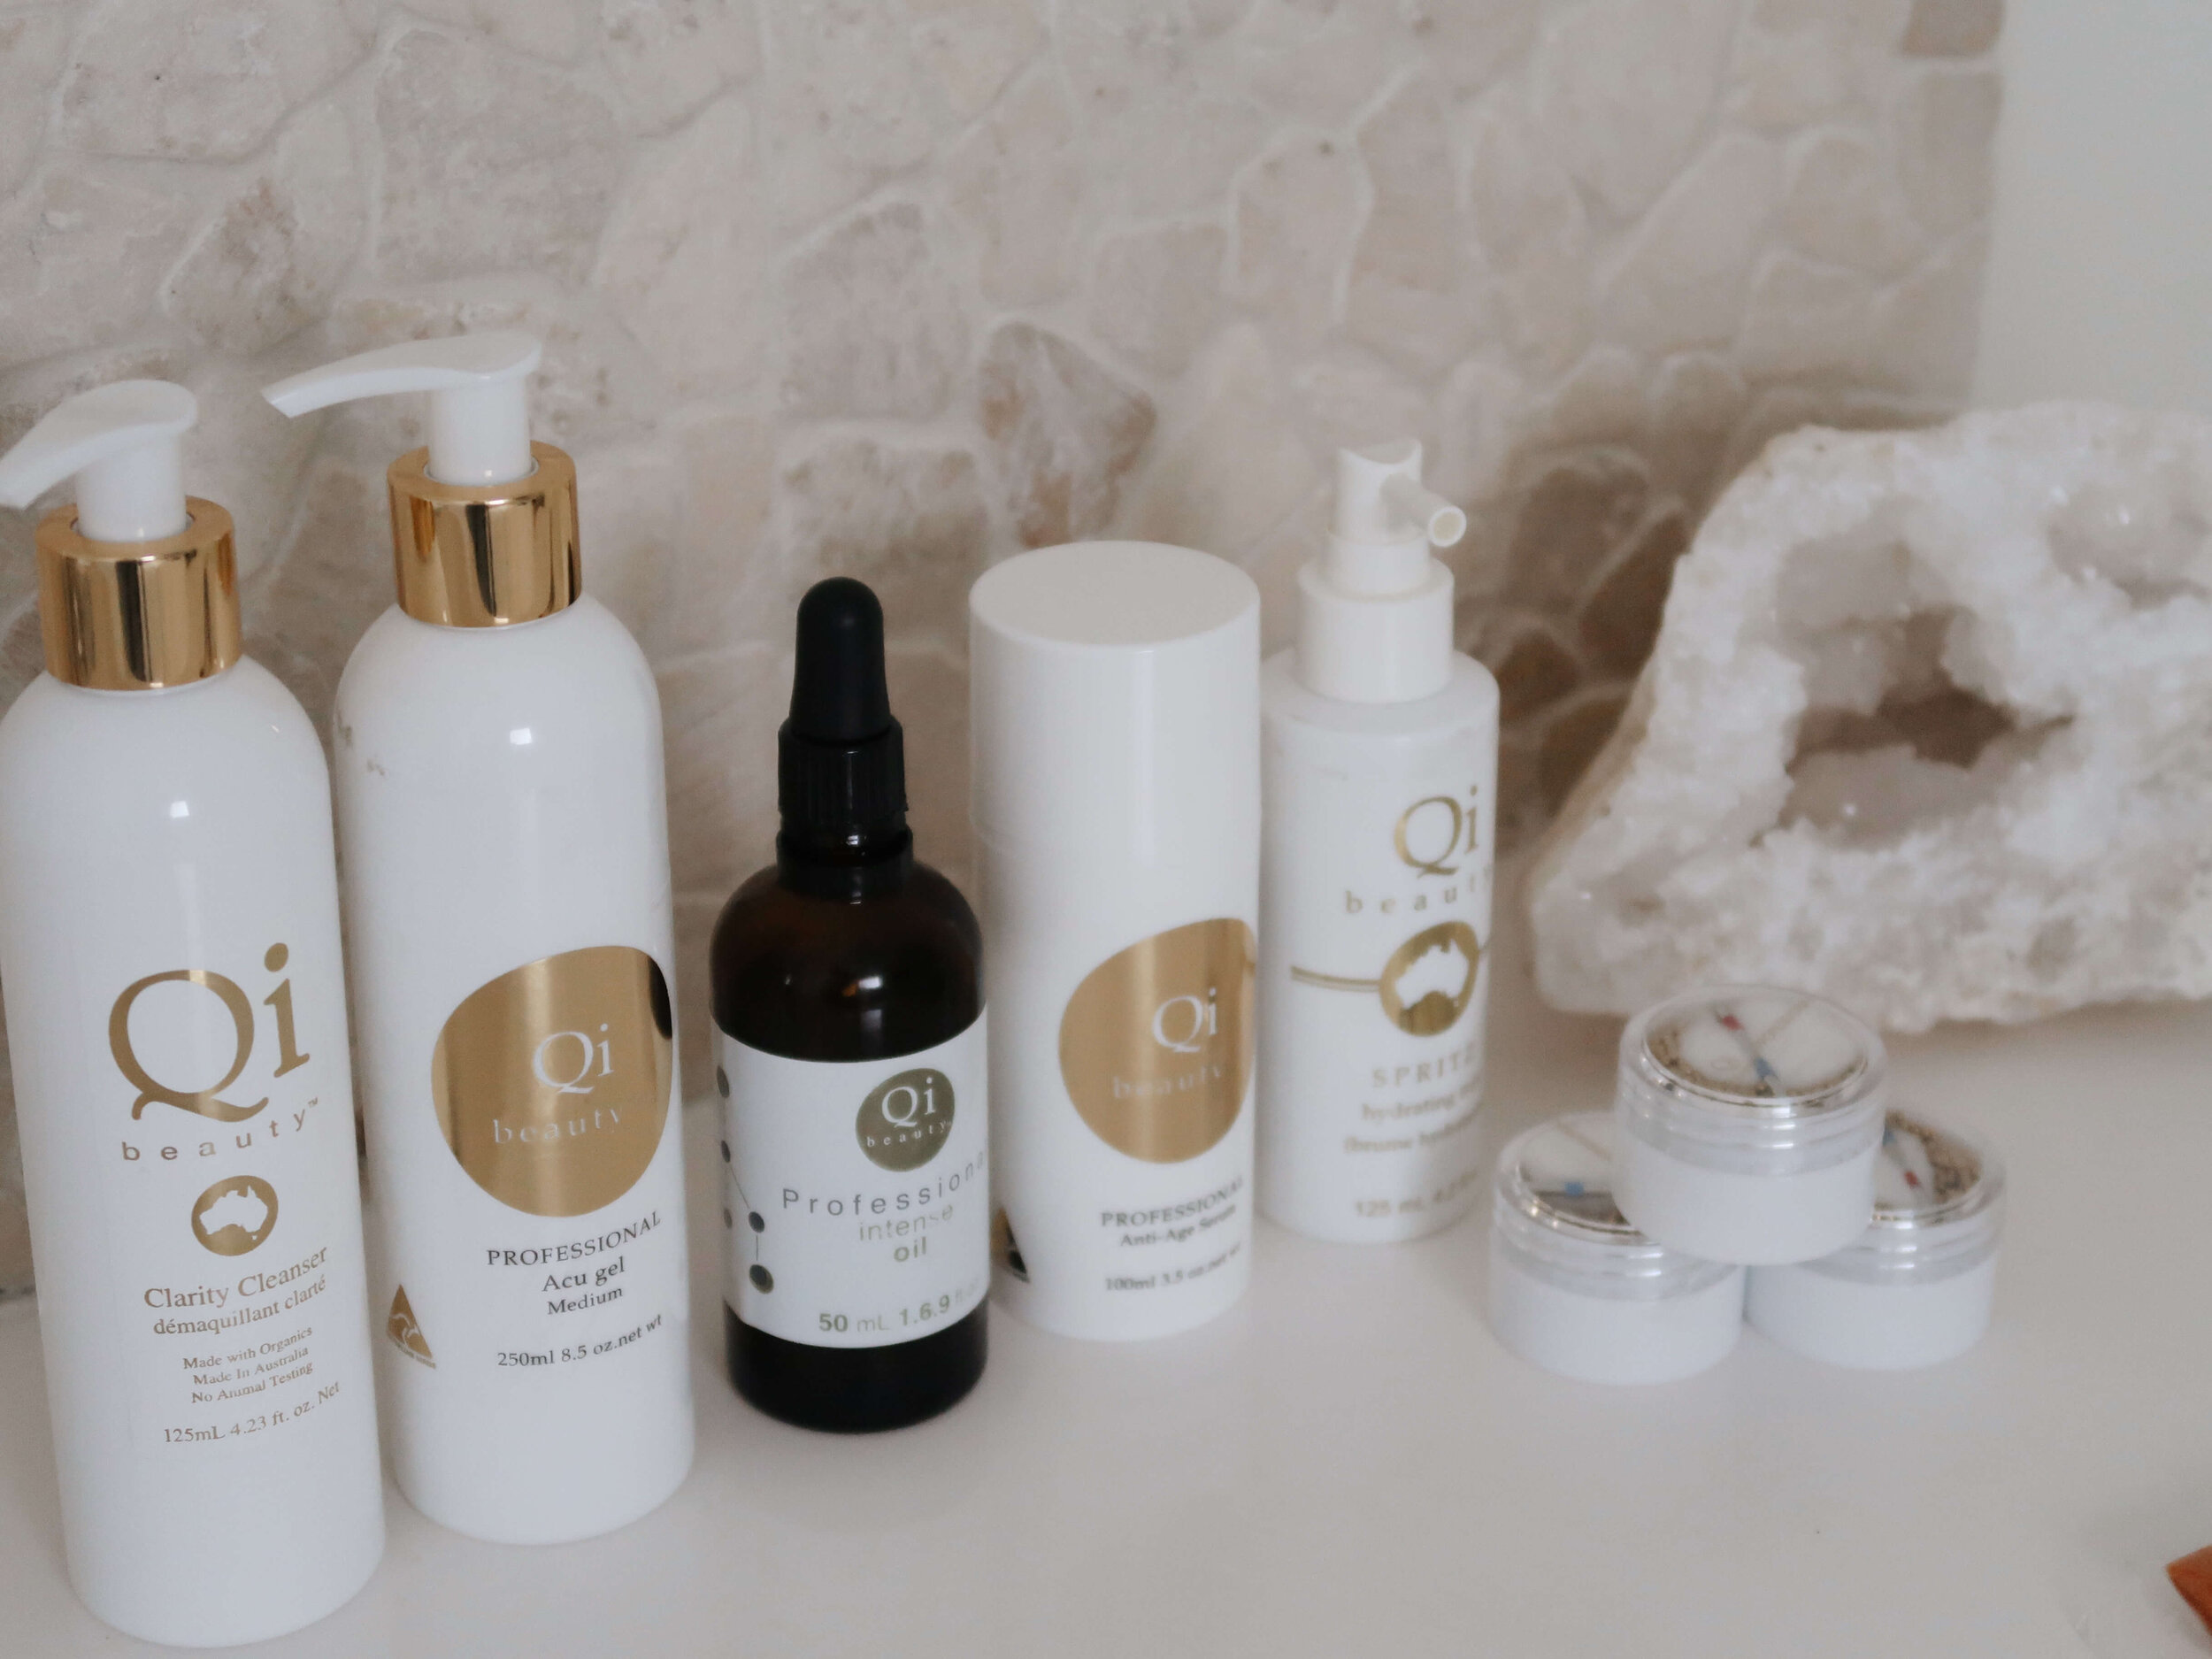 Boutique Professional Products Offer Sustainability — Qi beauty training